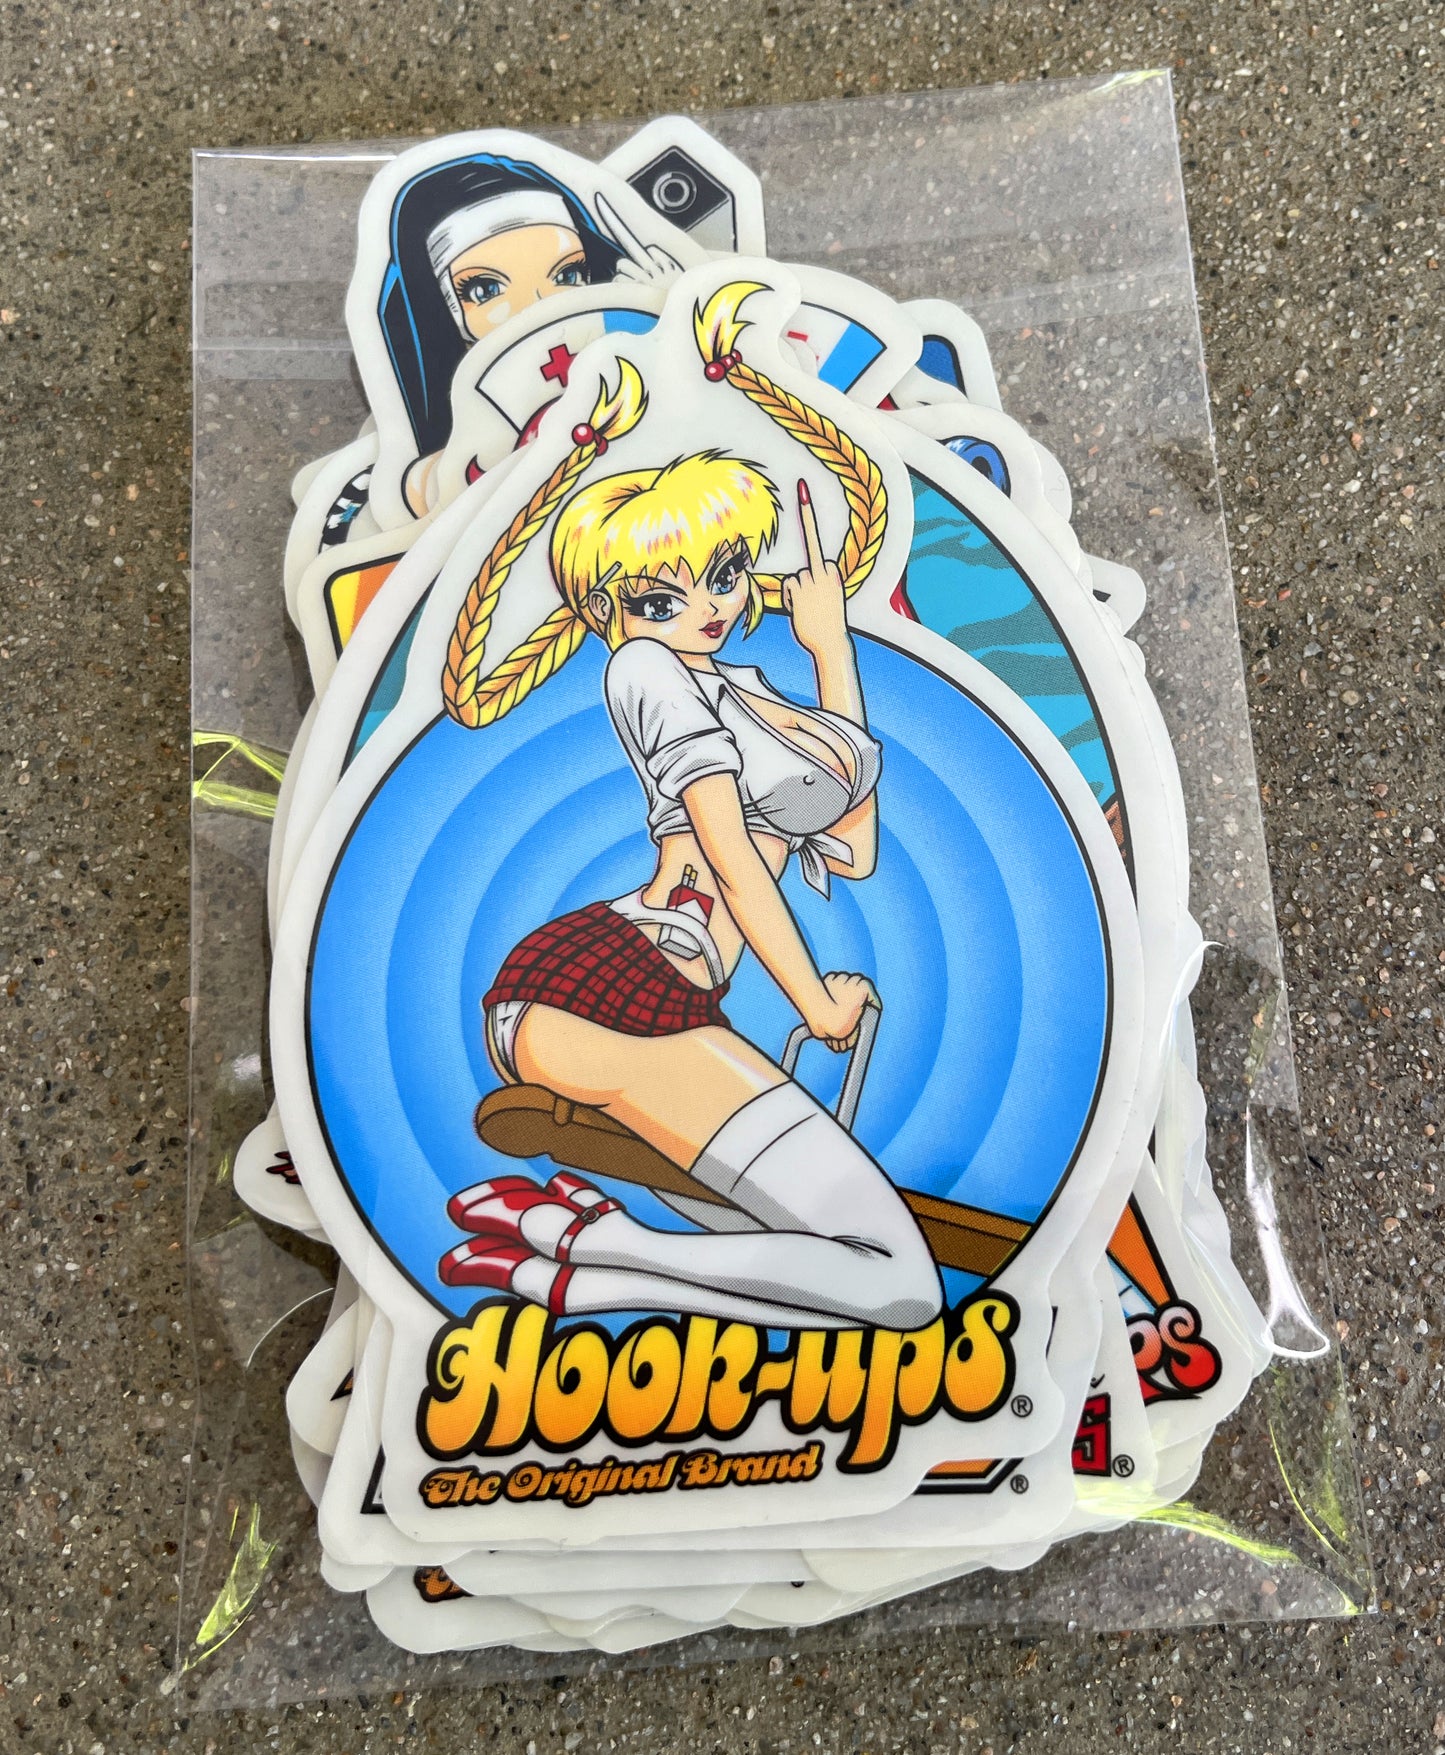 hook-ups classic stickers 30 pack 1